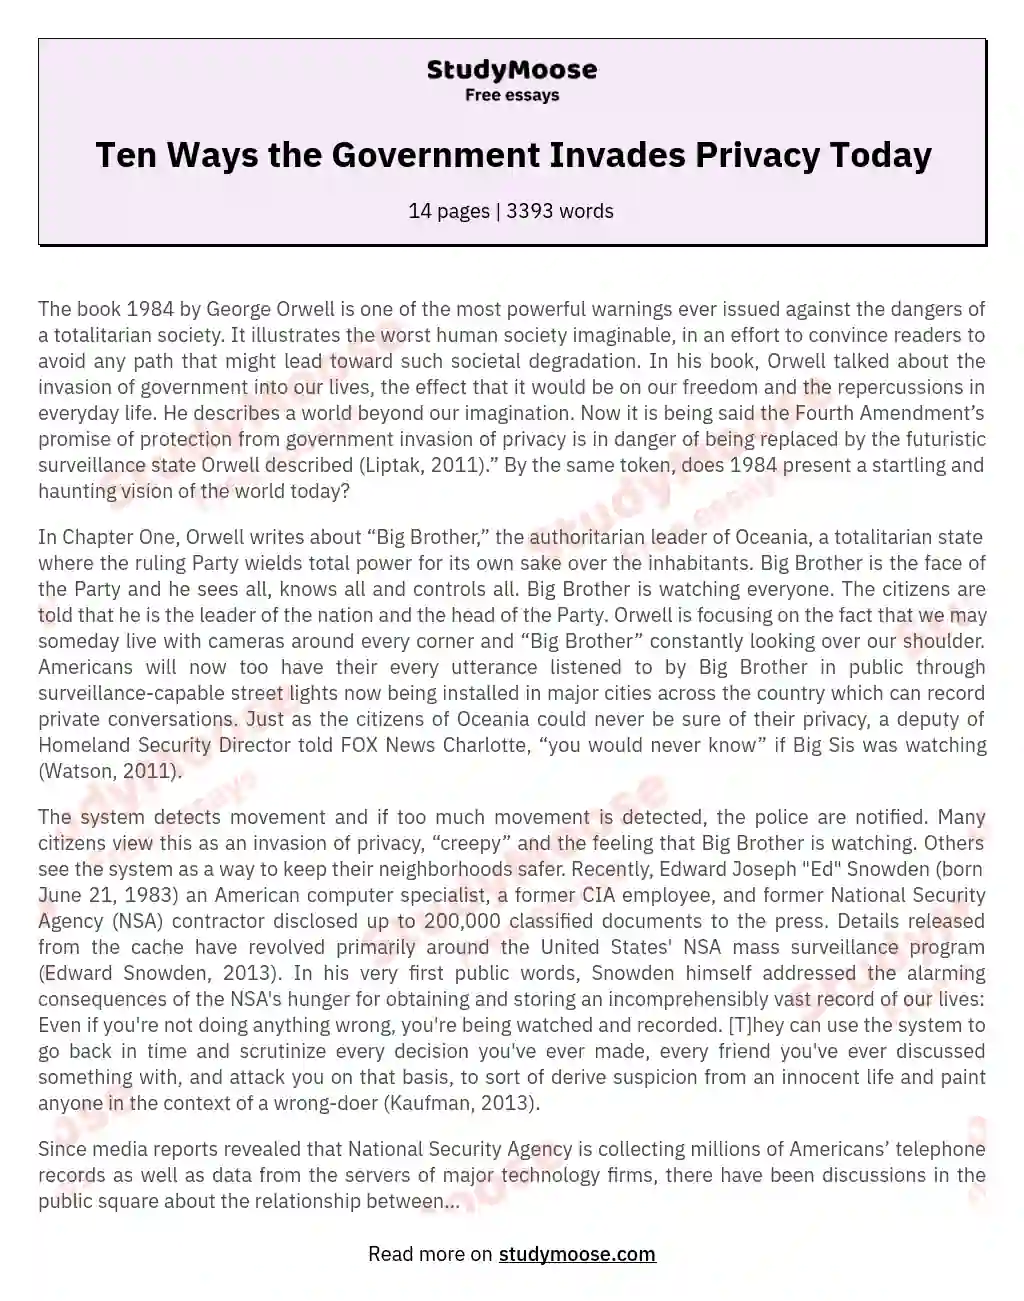 Ten Ways the Government Invades Privacy Today essay